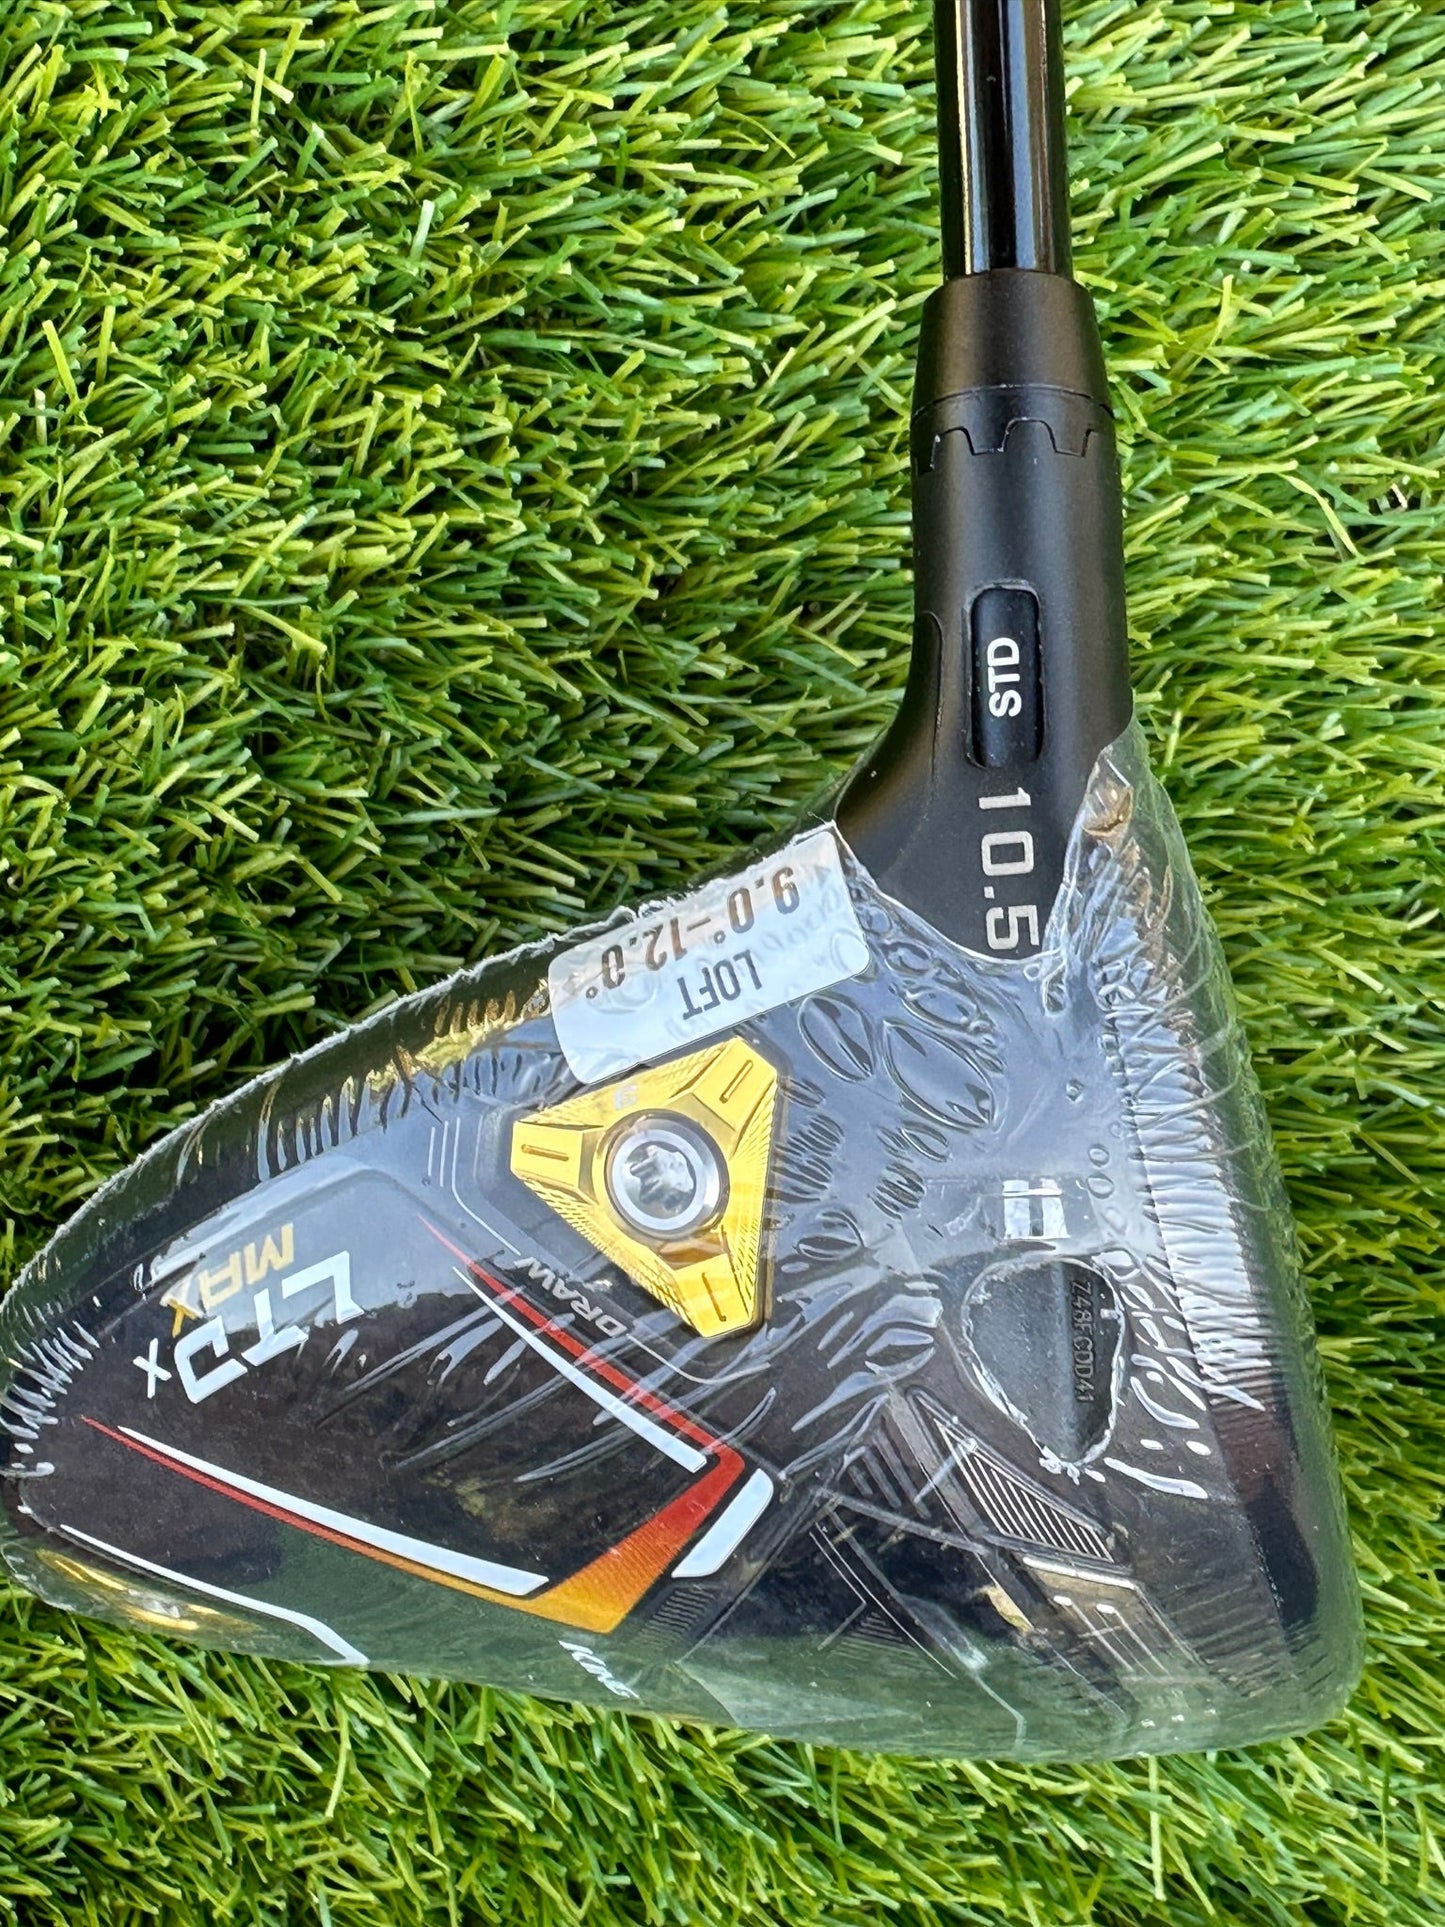 (New) Cobra King LTD X Max Adjustable Driver, Headcover included Left Handed - Golf Store UK